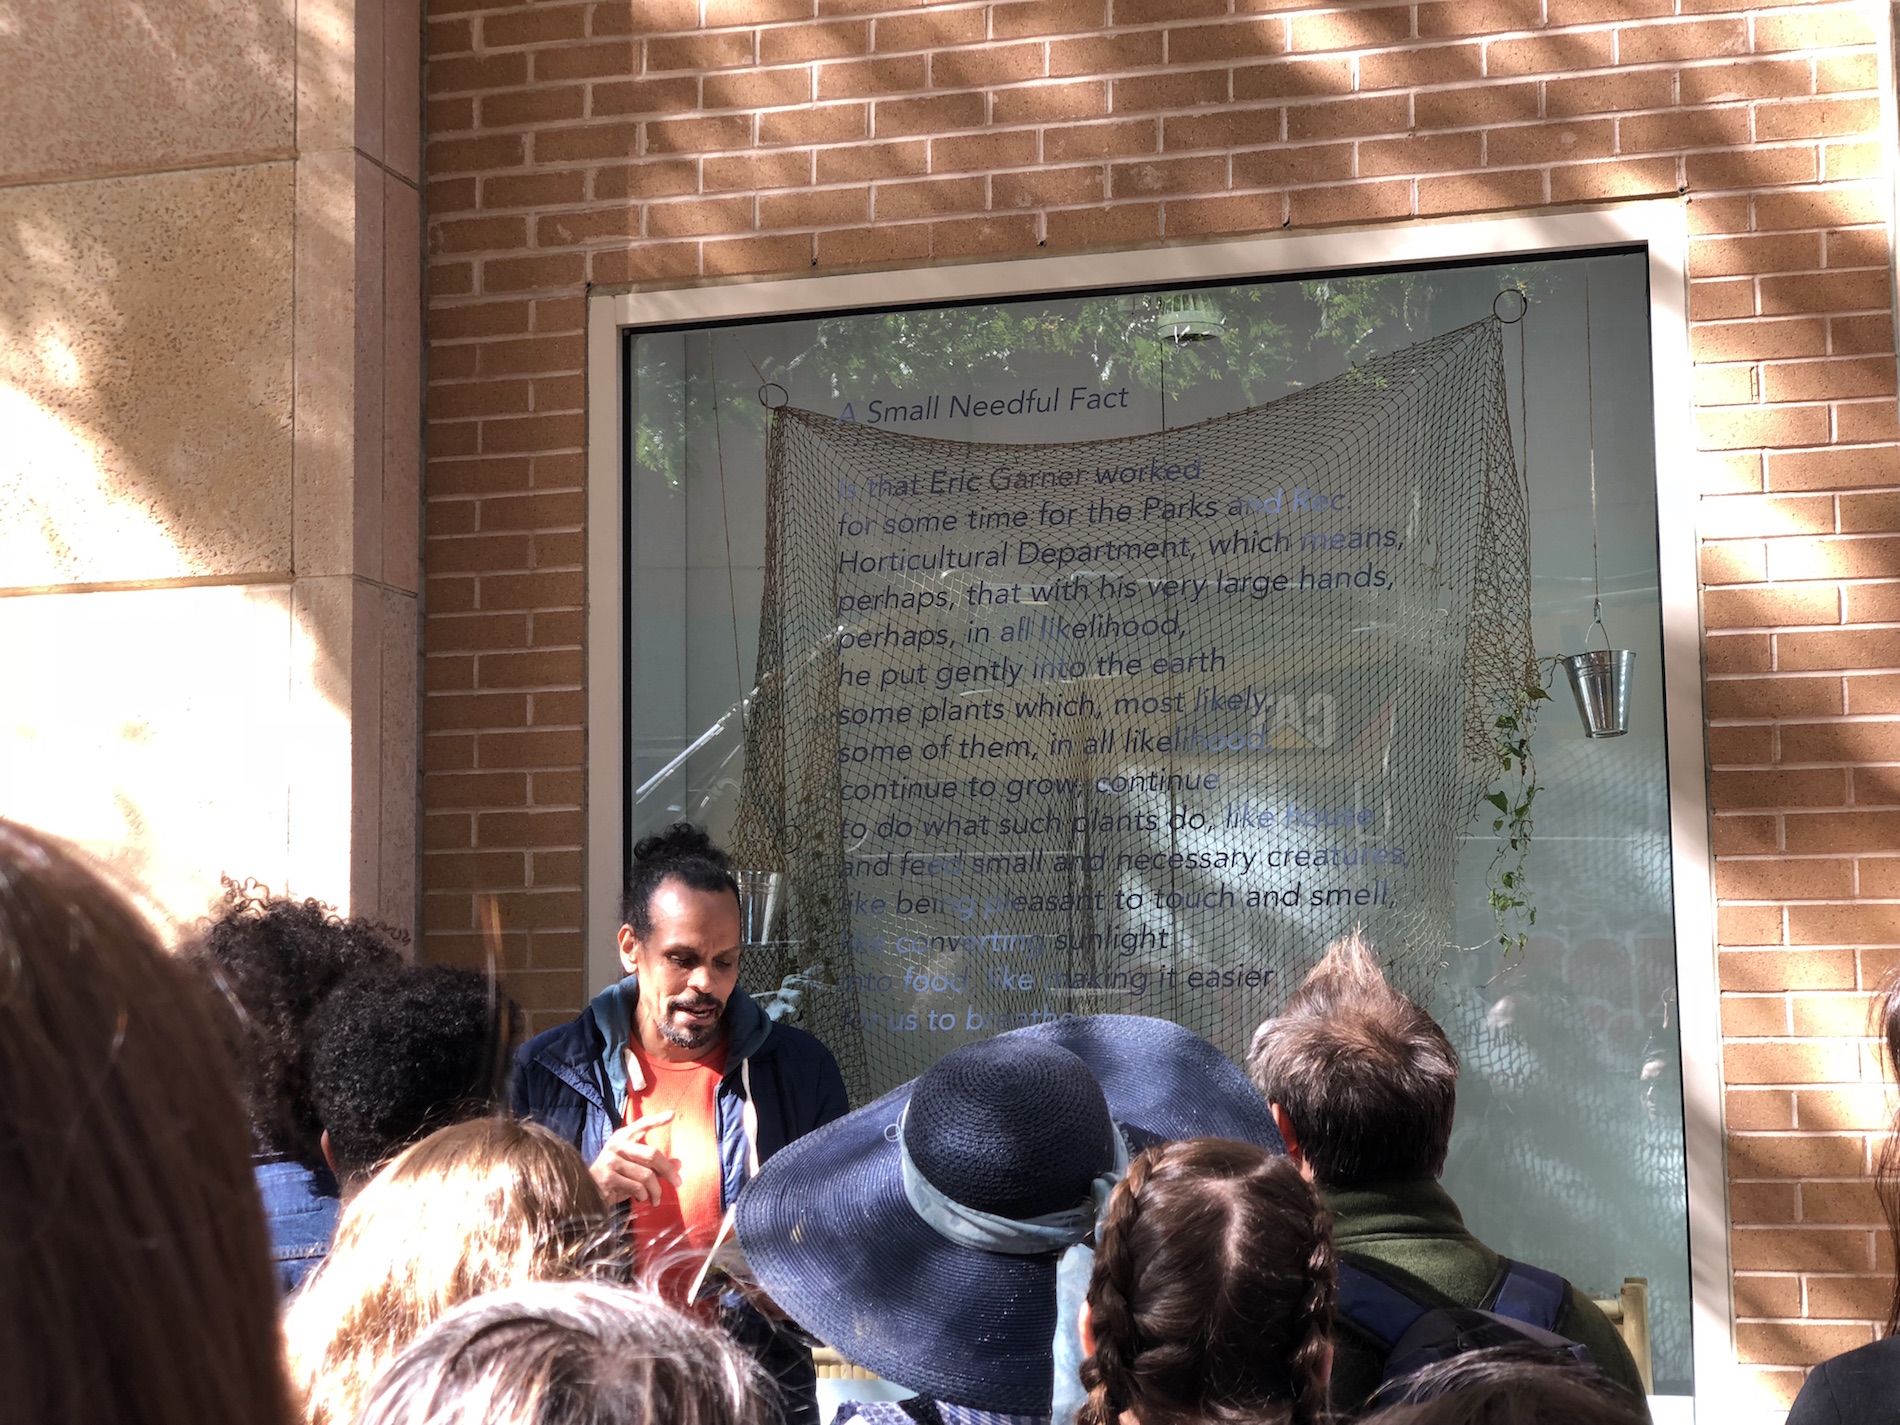 Ross Gay stands in front of window displaying his poem with an audience before him